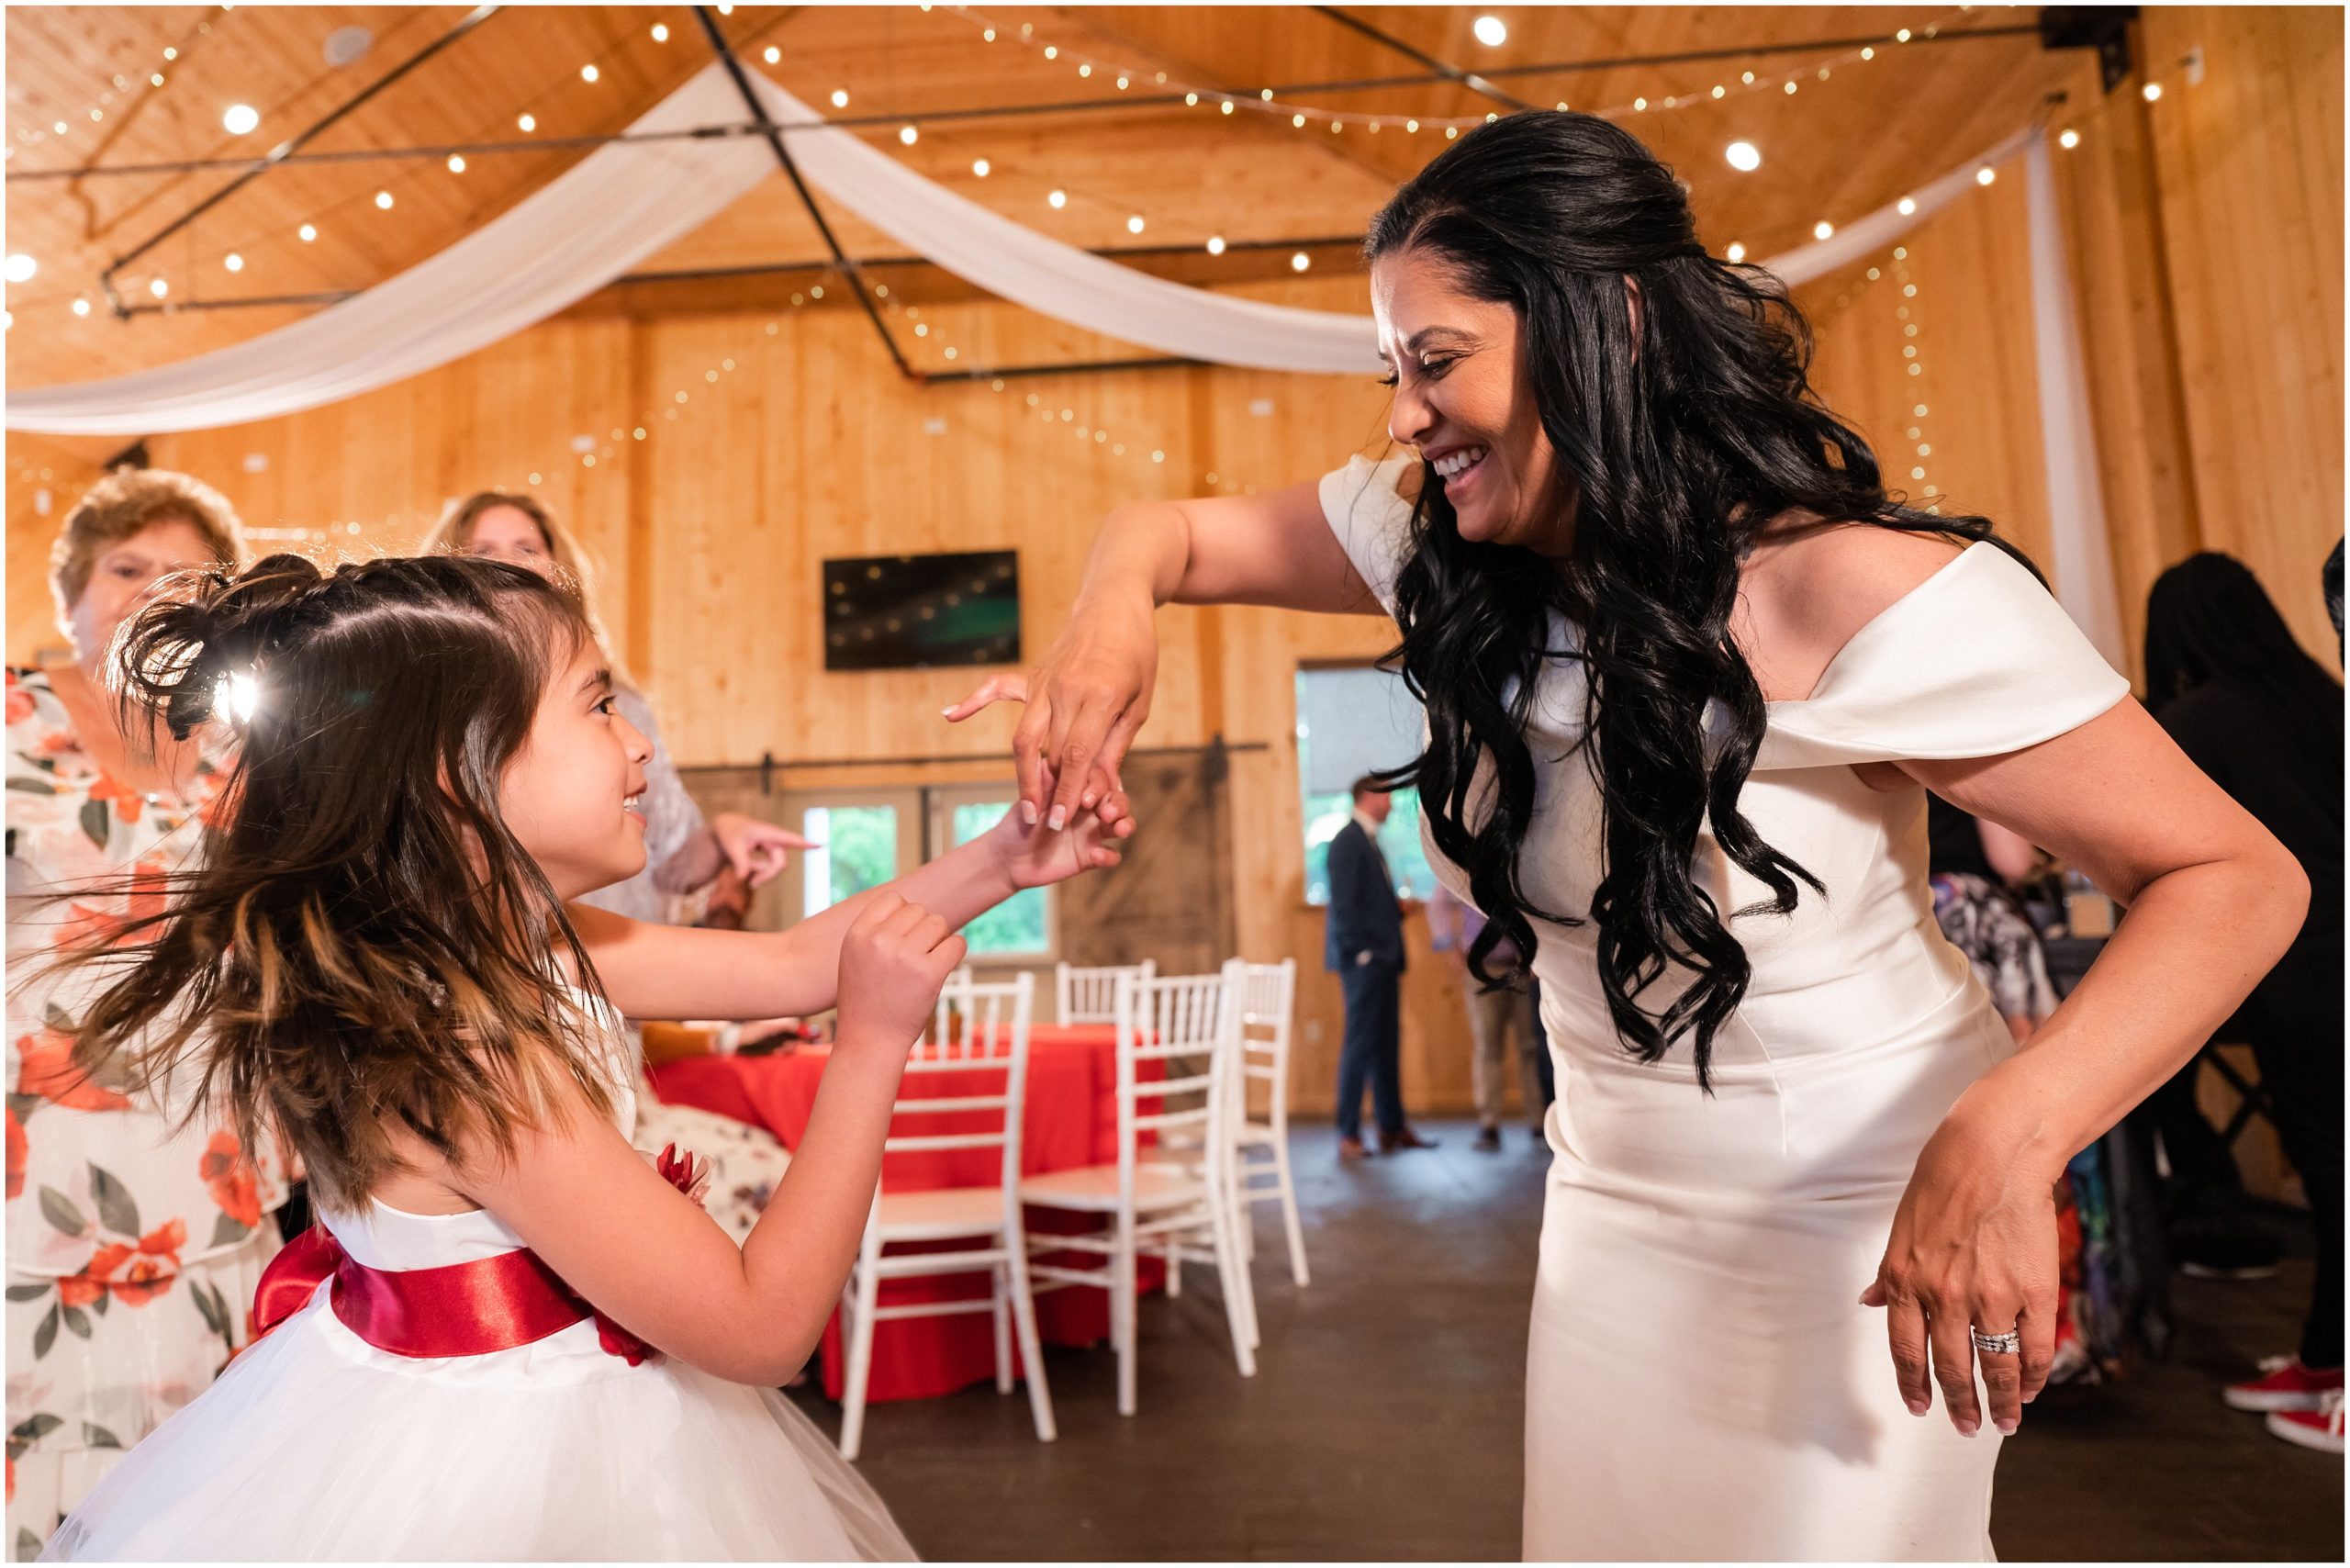 Group and party dancing in rustic barn | Red and Black Oak Hills Utah Spring Wedding | Jessie and Dallin Photography